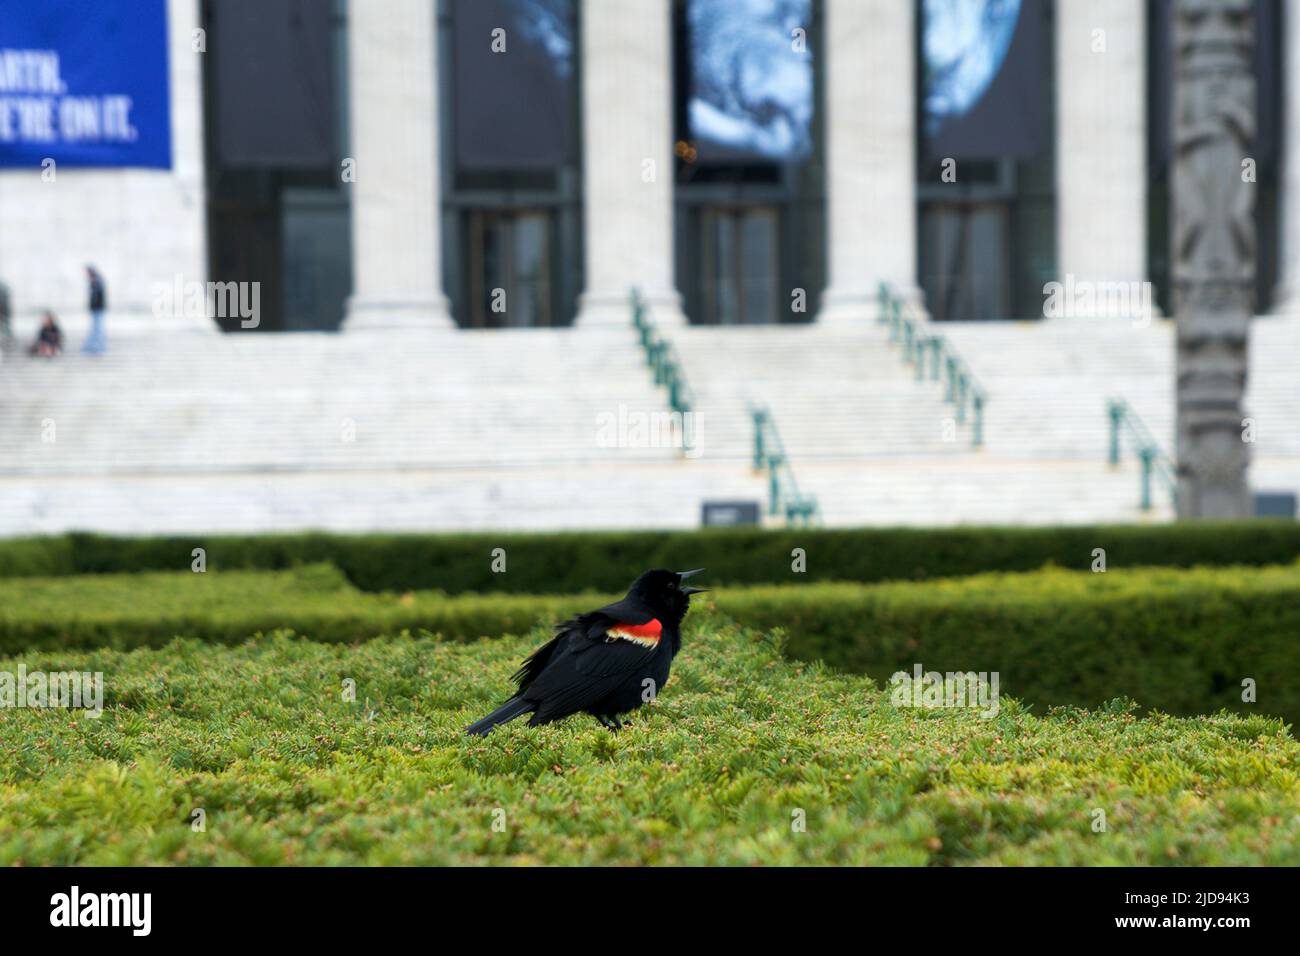 CHICAGO, ILLINOIS, UNITED STATES - MAY 12, 2018: A black bird on a green hedge outside the Field Museum of Natural History in Chicago Stock Photo